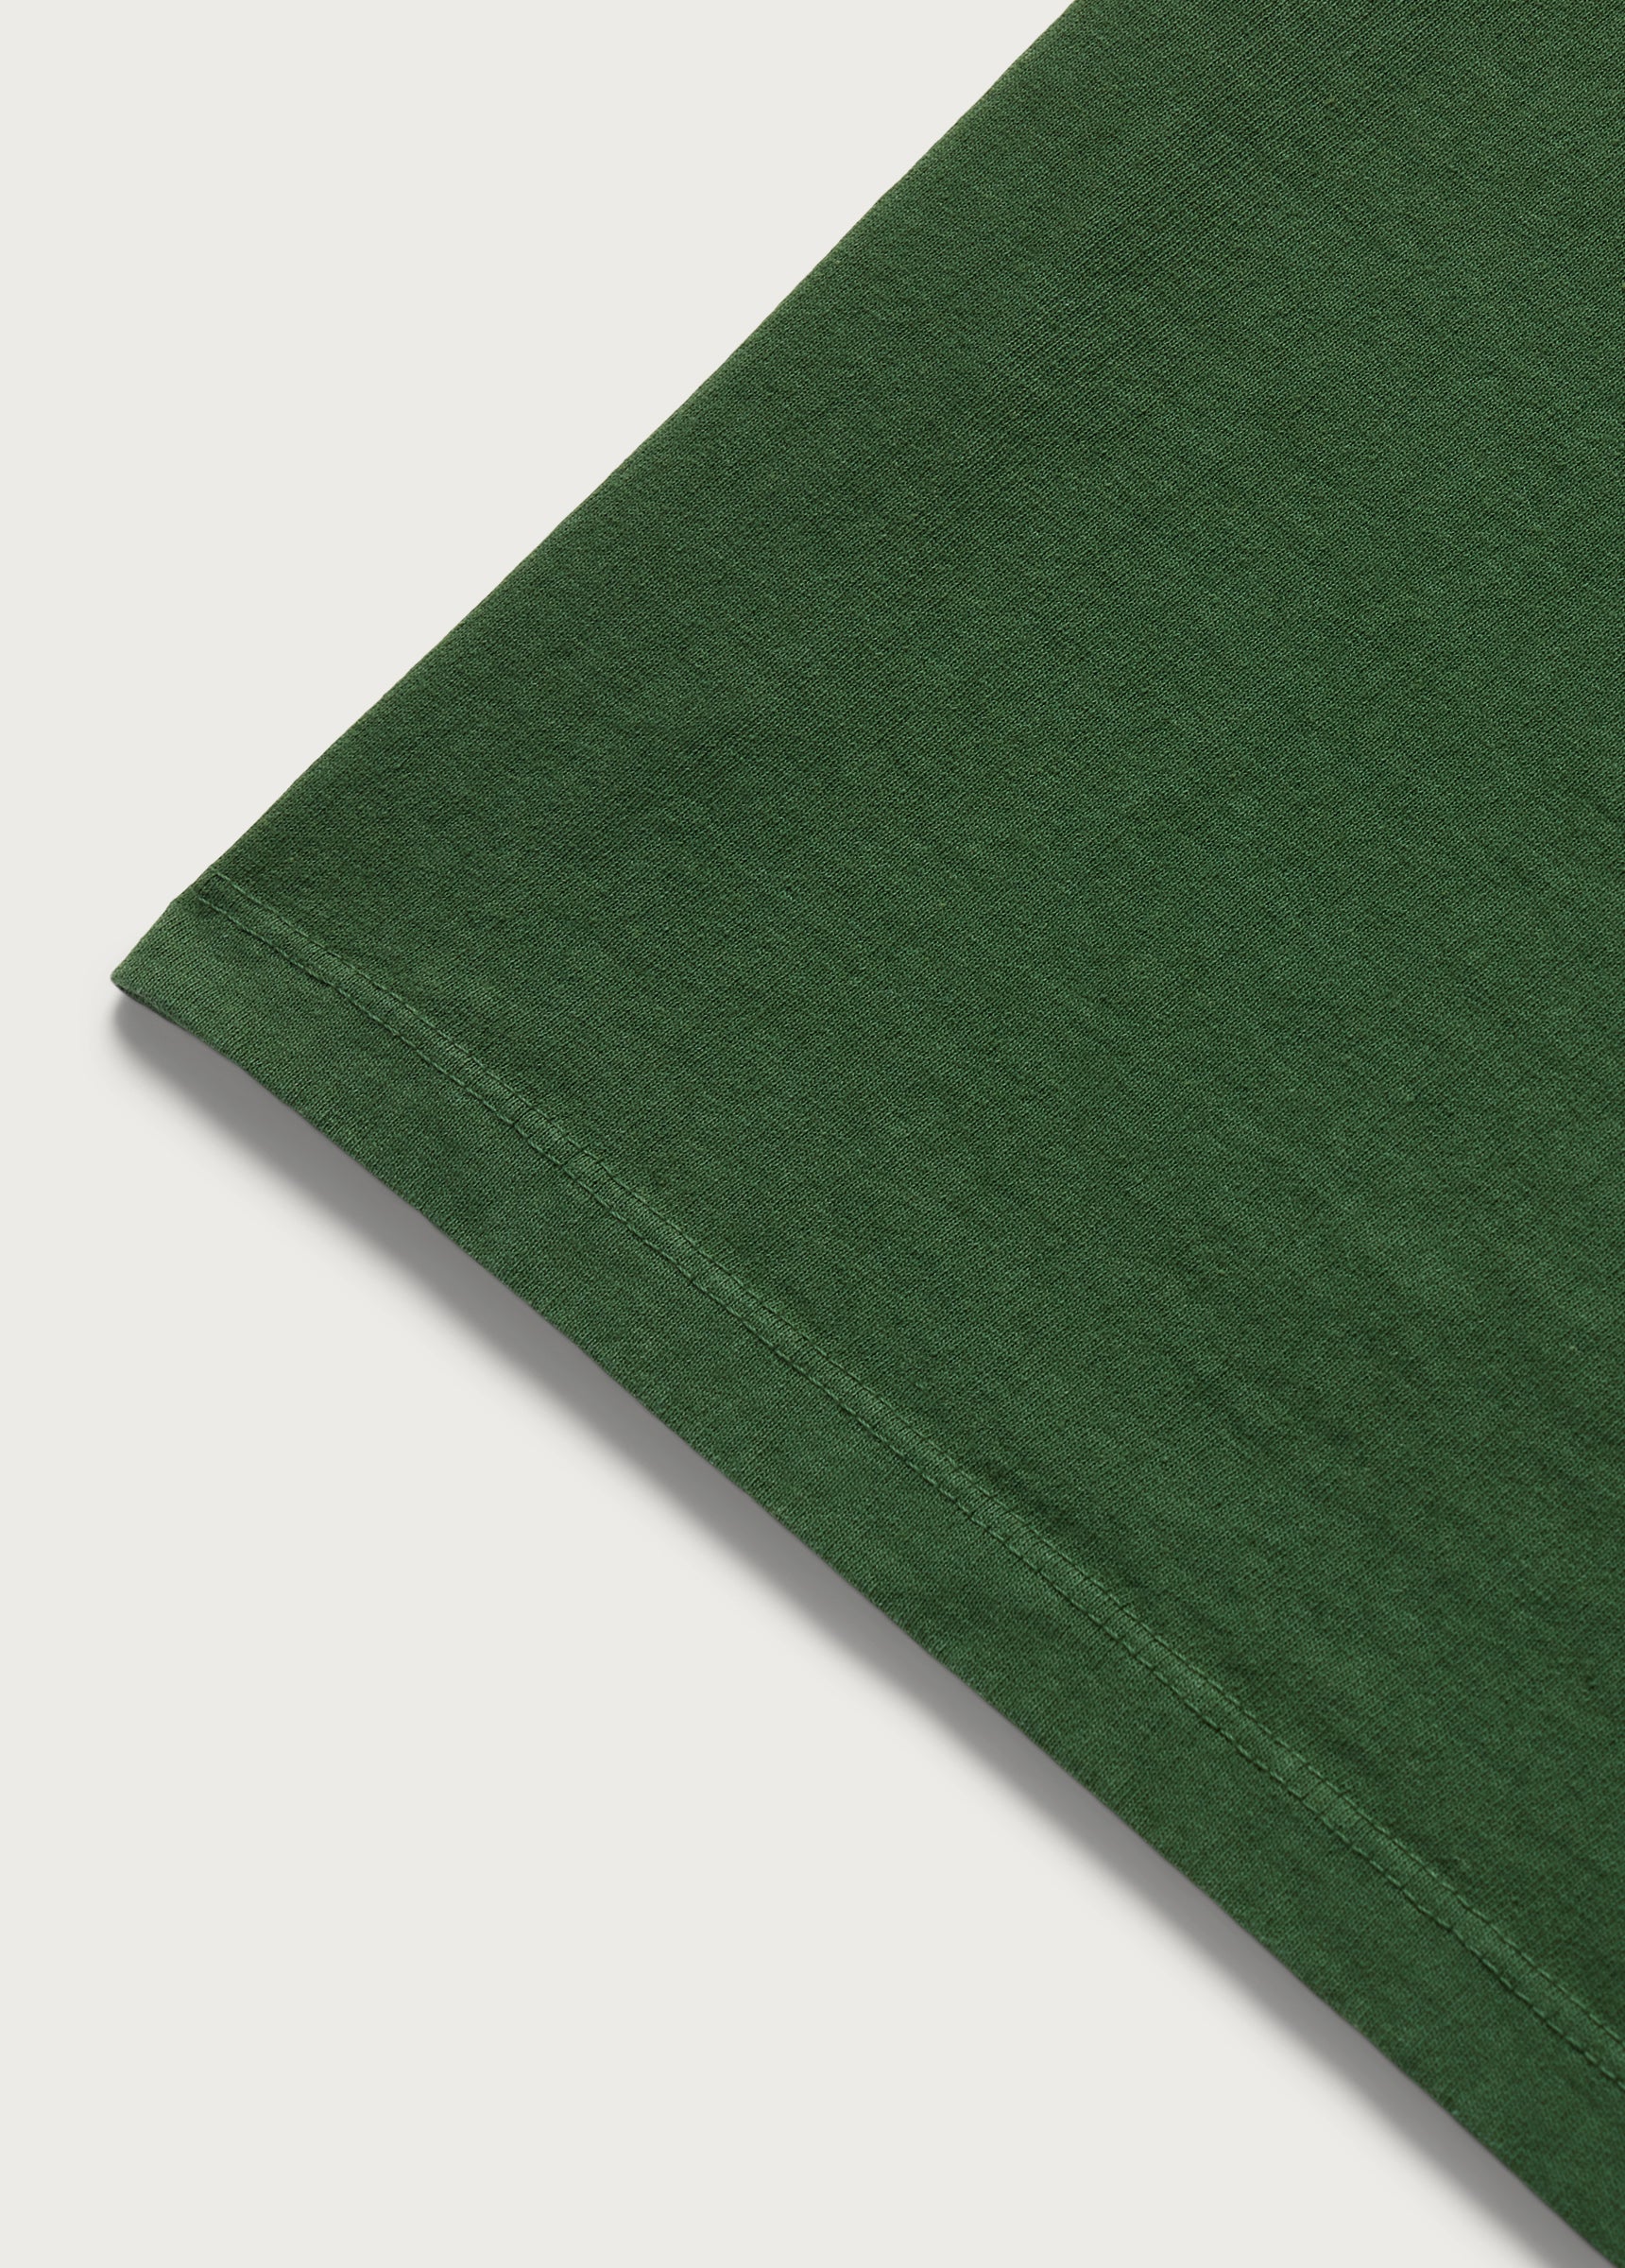 Screaming Eagle Tee | Washed Forest Green